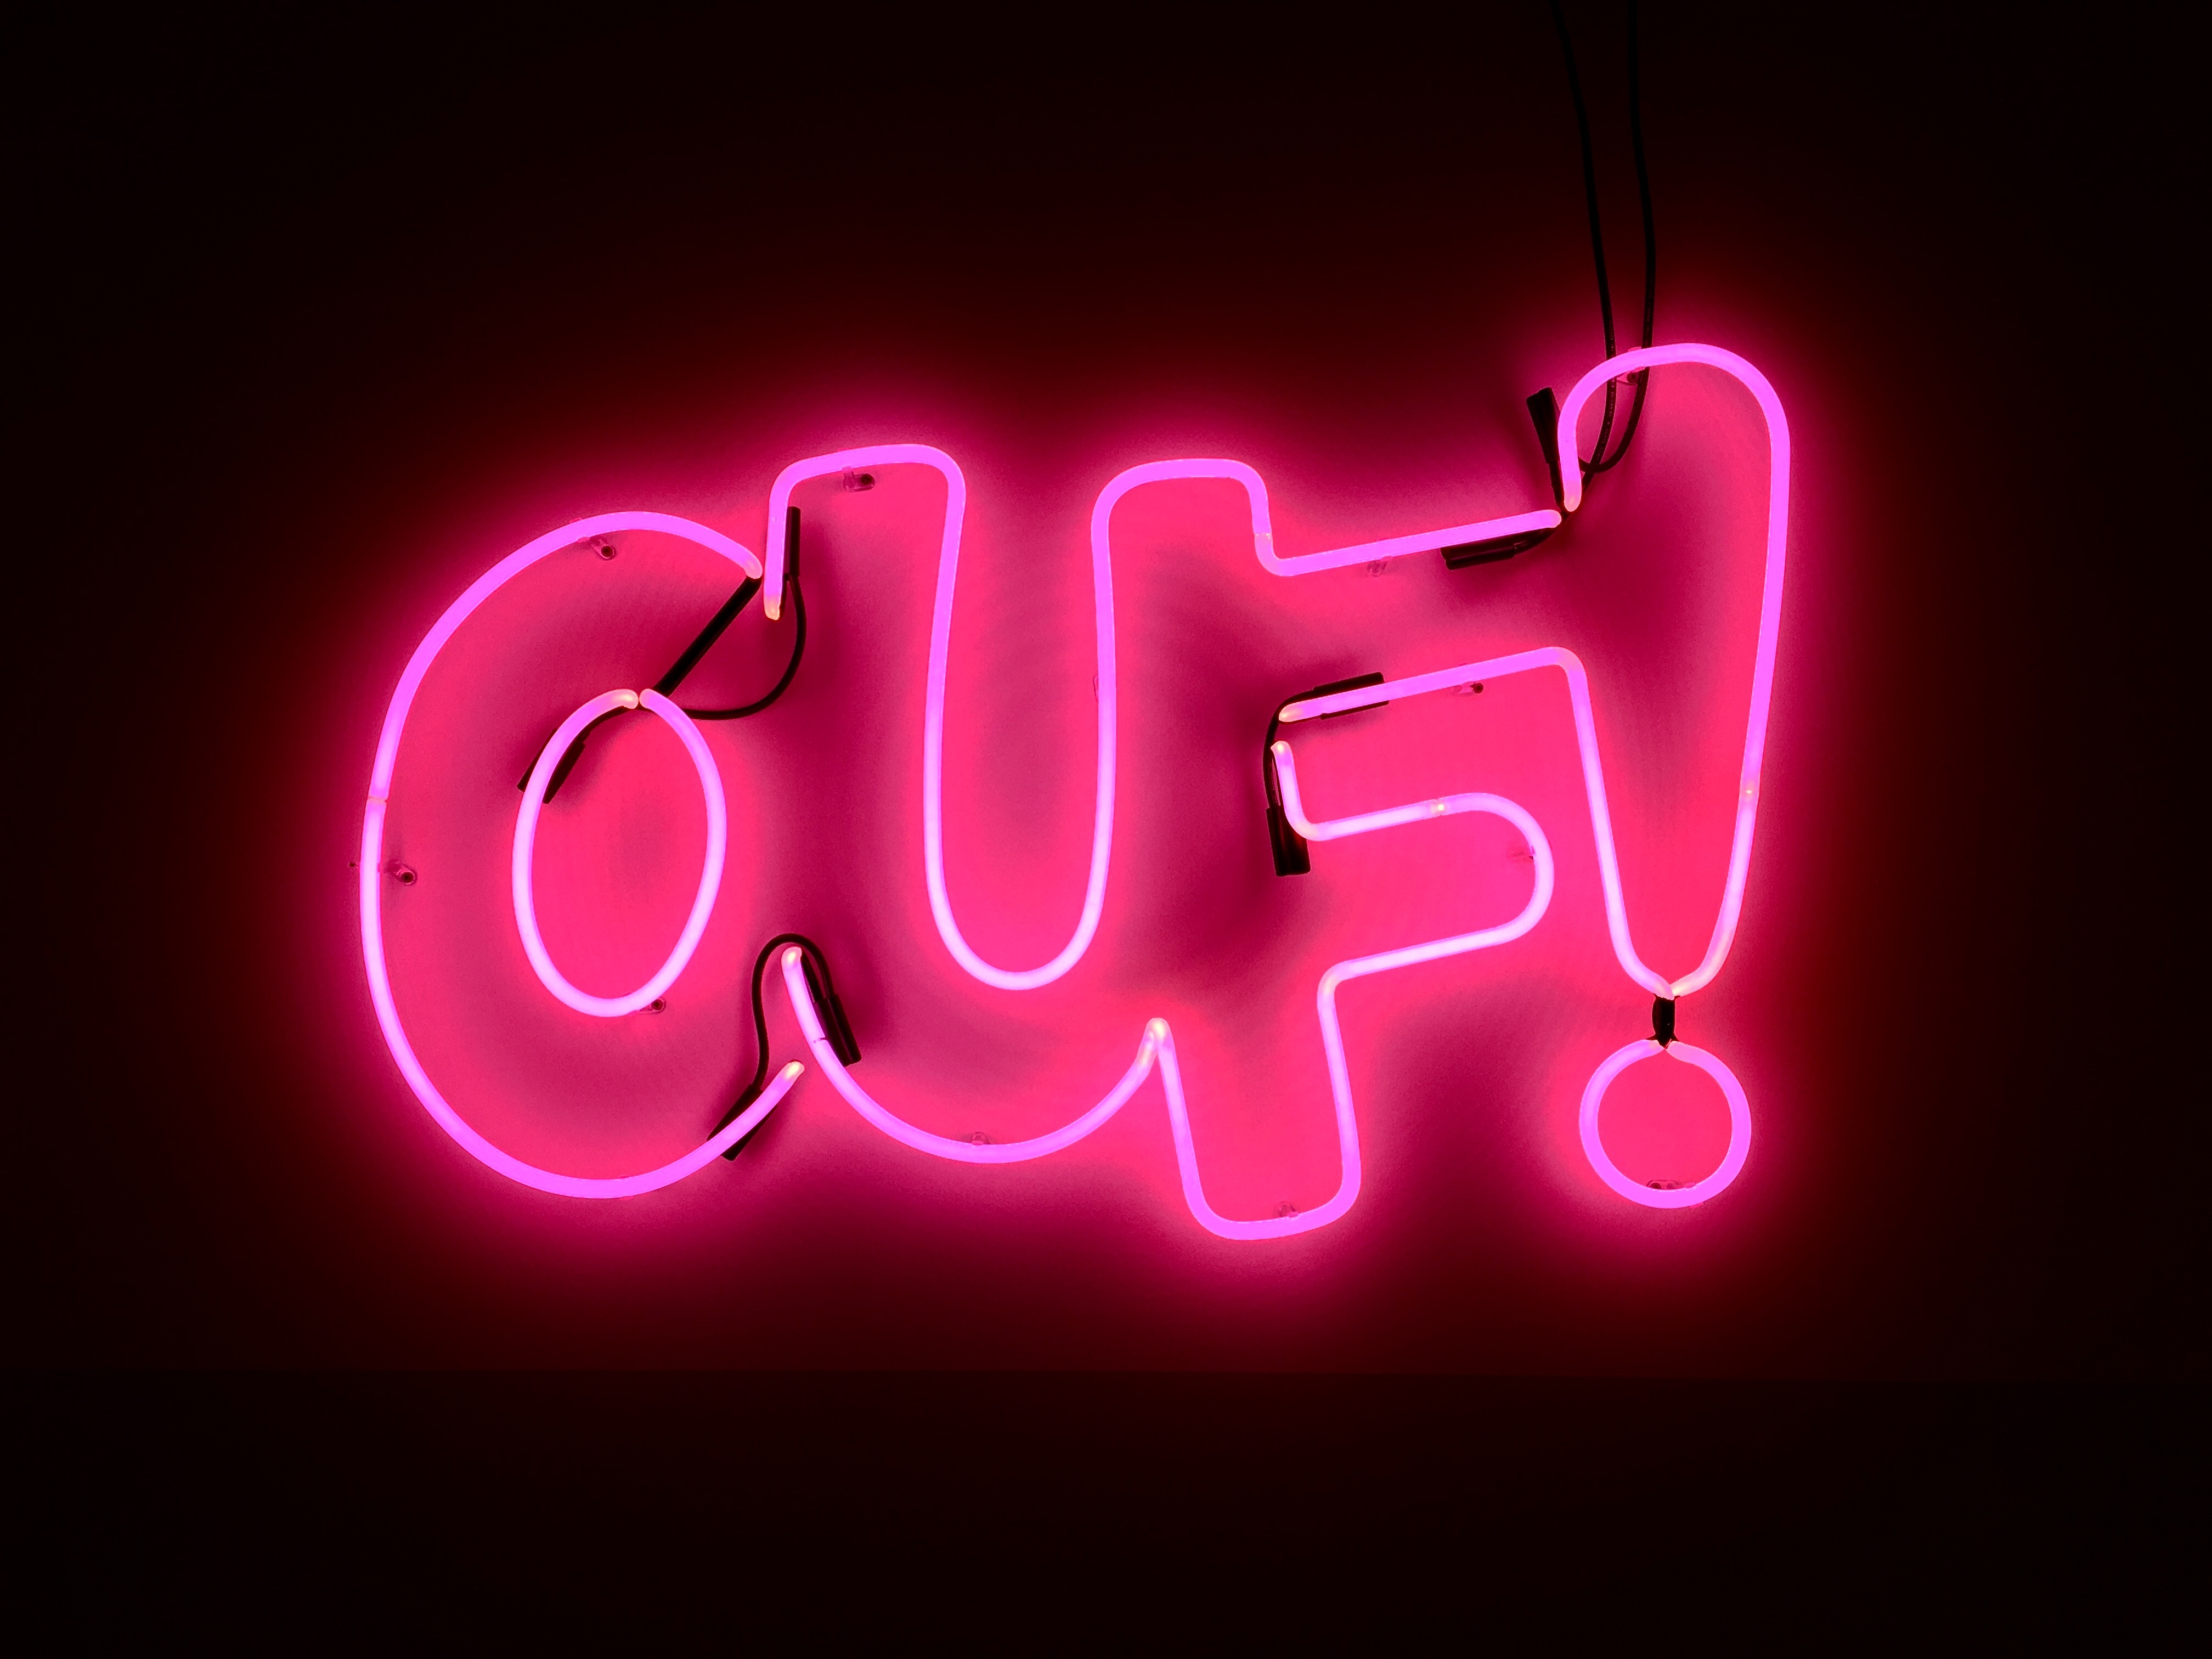 Ouf Light Signage, Ouf Neon Light Signage, Neon Sign, - Neon Sign - HD Wallpaper 